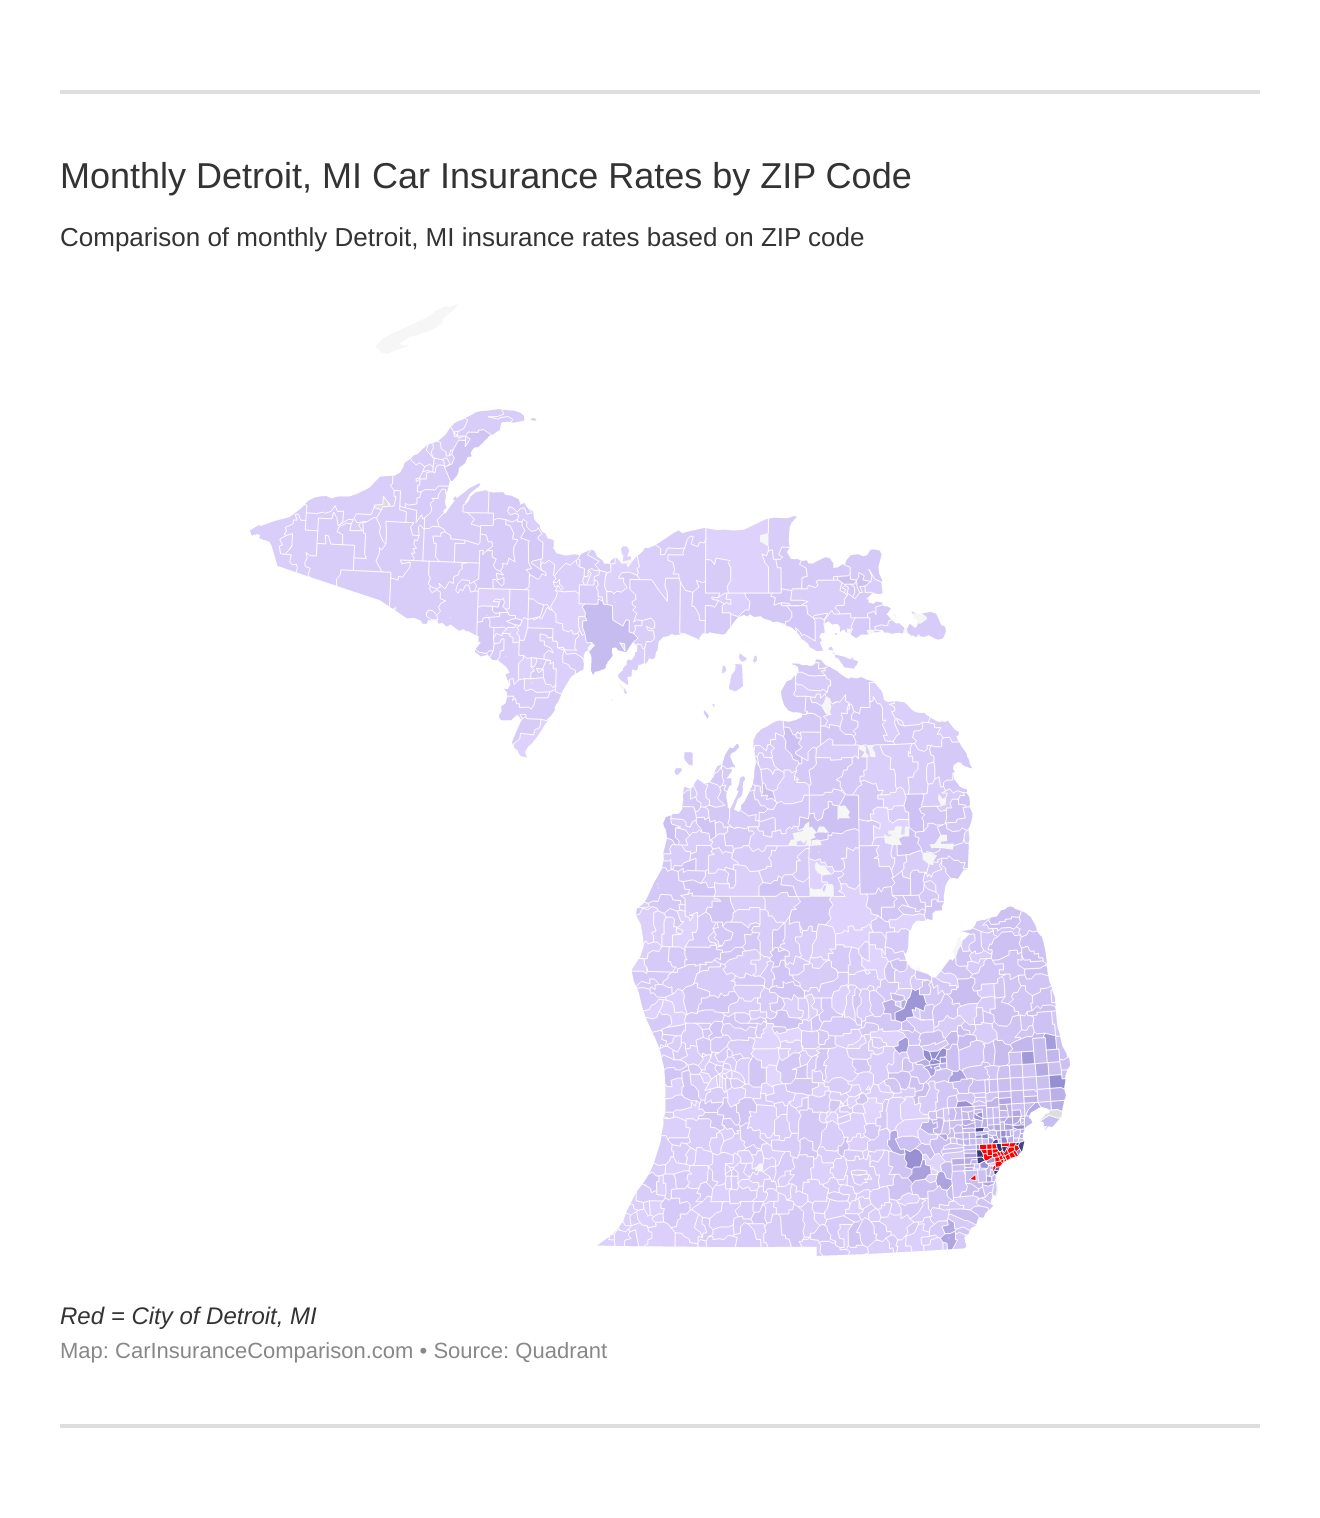 Monthly Detroit, MI Car Insurance Rates by ZIP Code